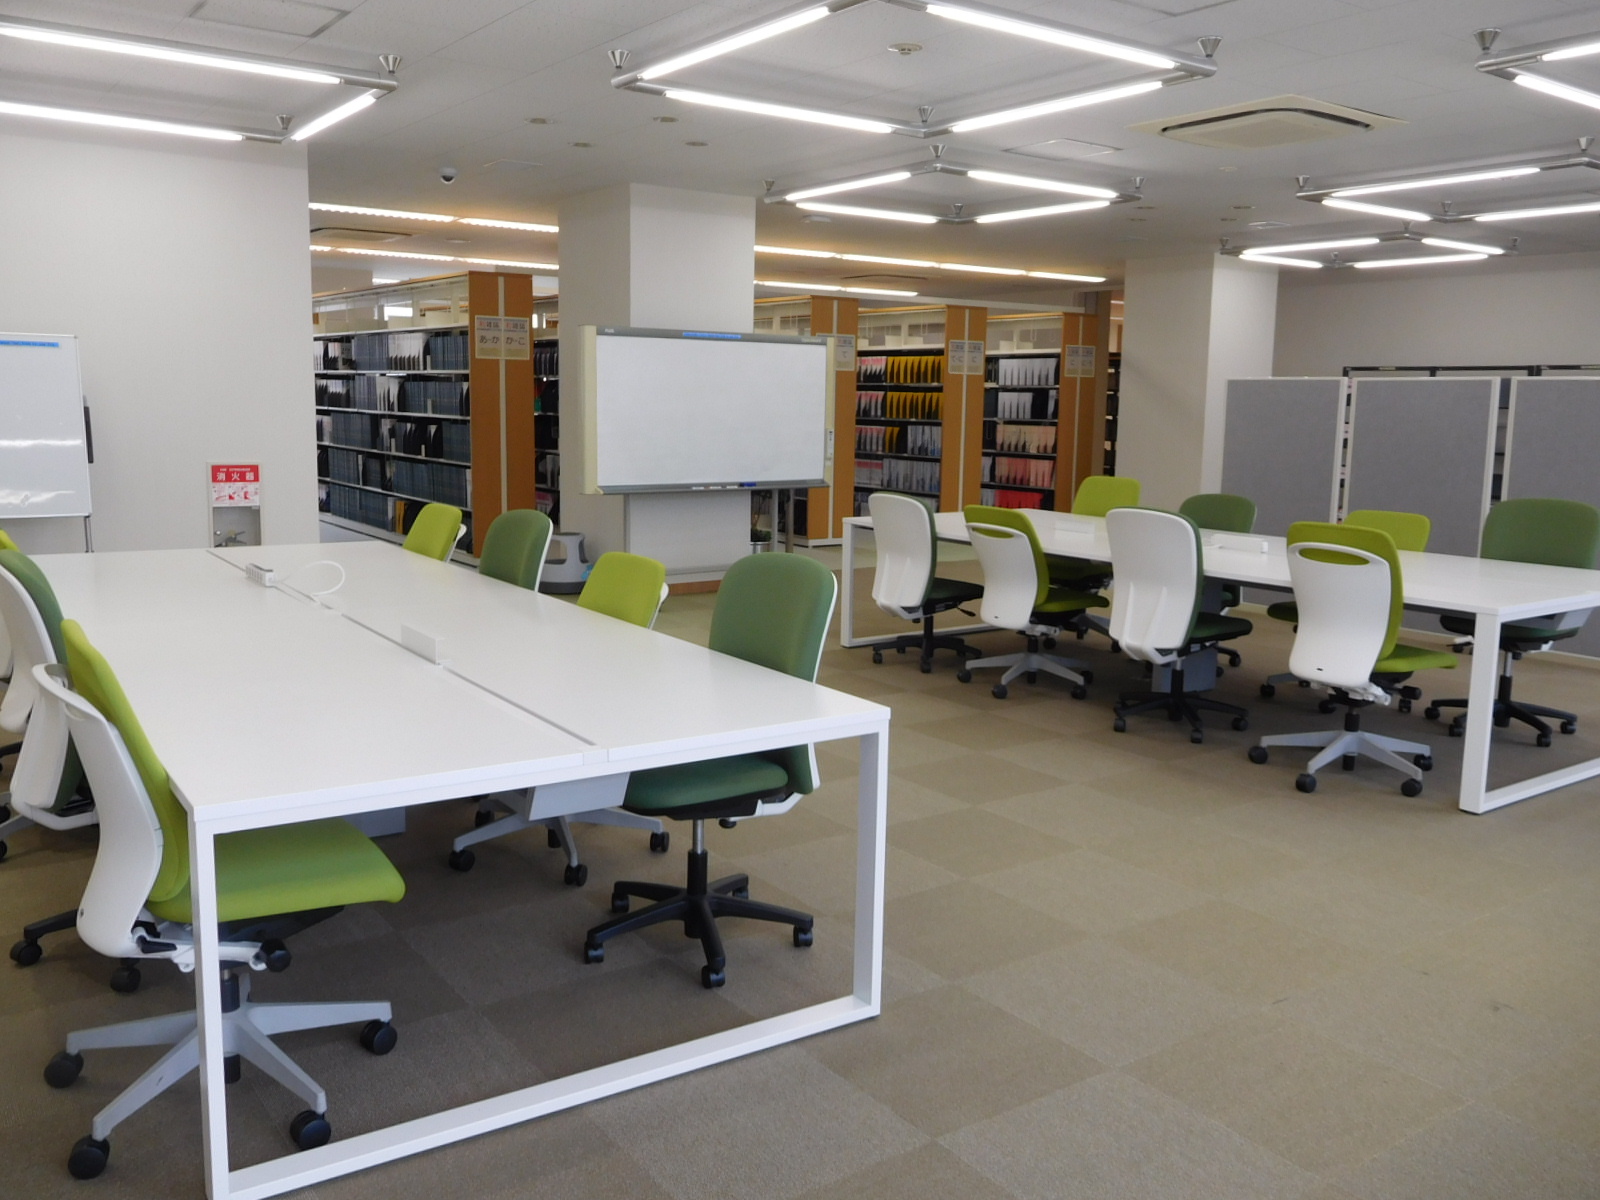 Group Study Space 2